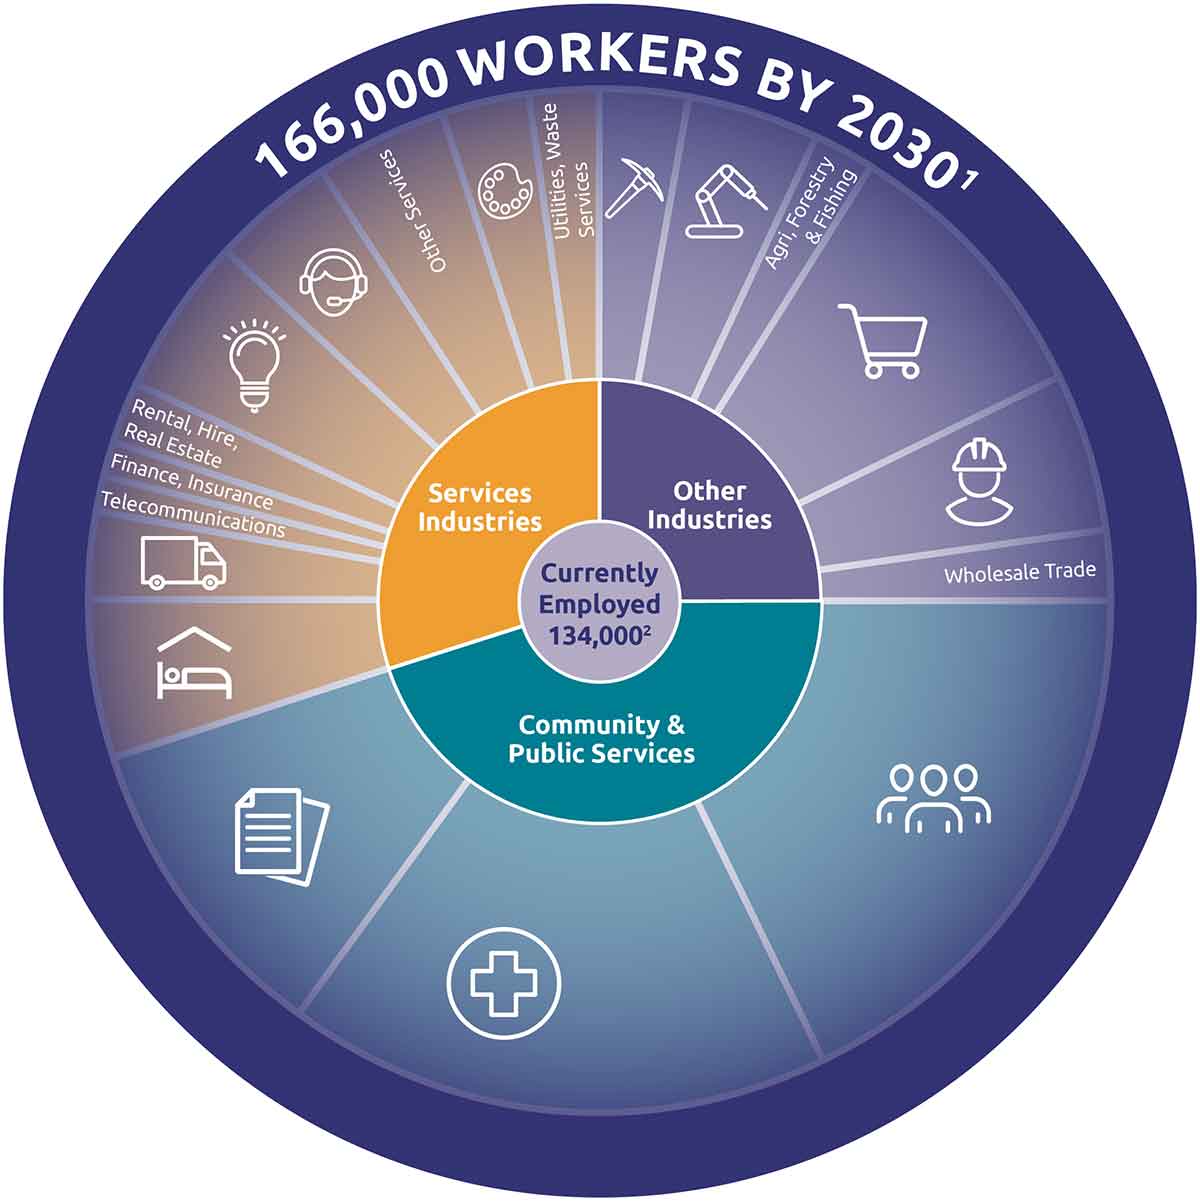 Currently 134,000 employed; service industries, other industries, community and public services; 166,000 workers by 2030